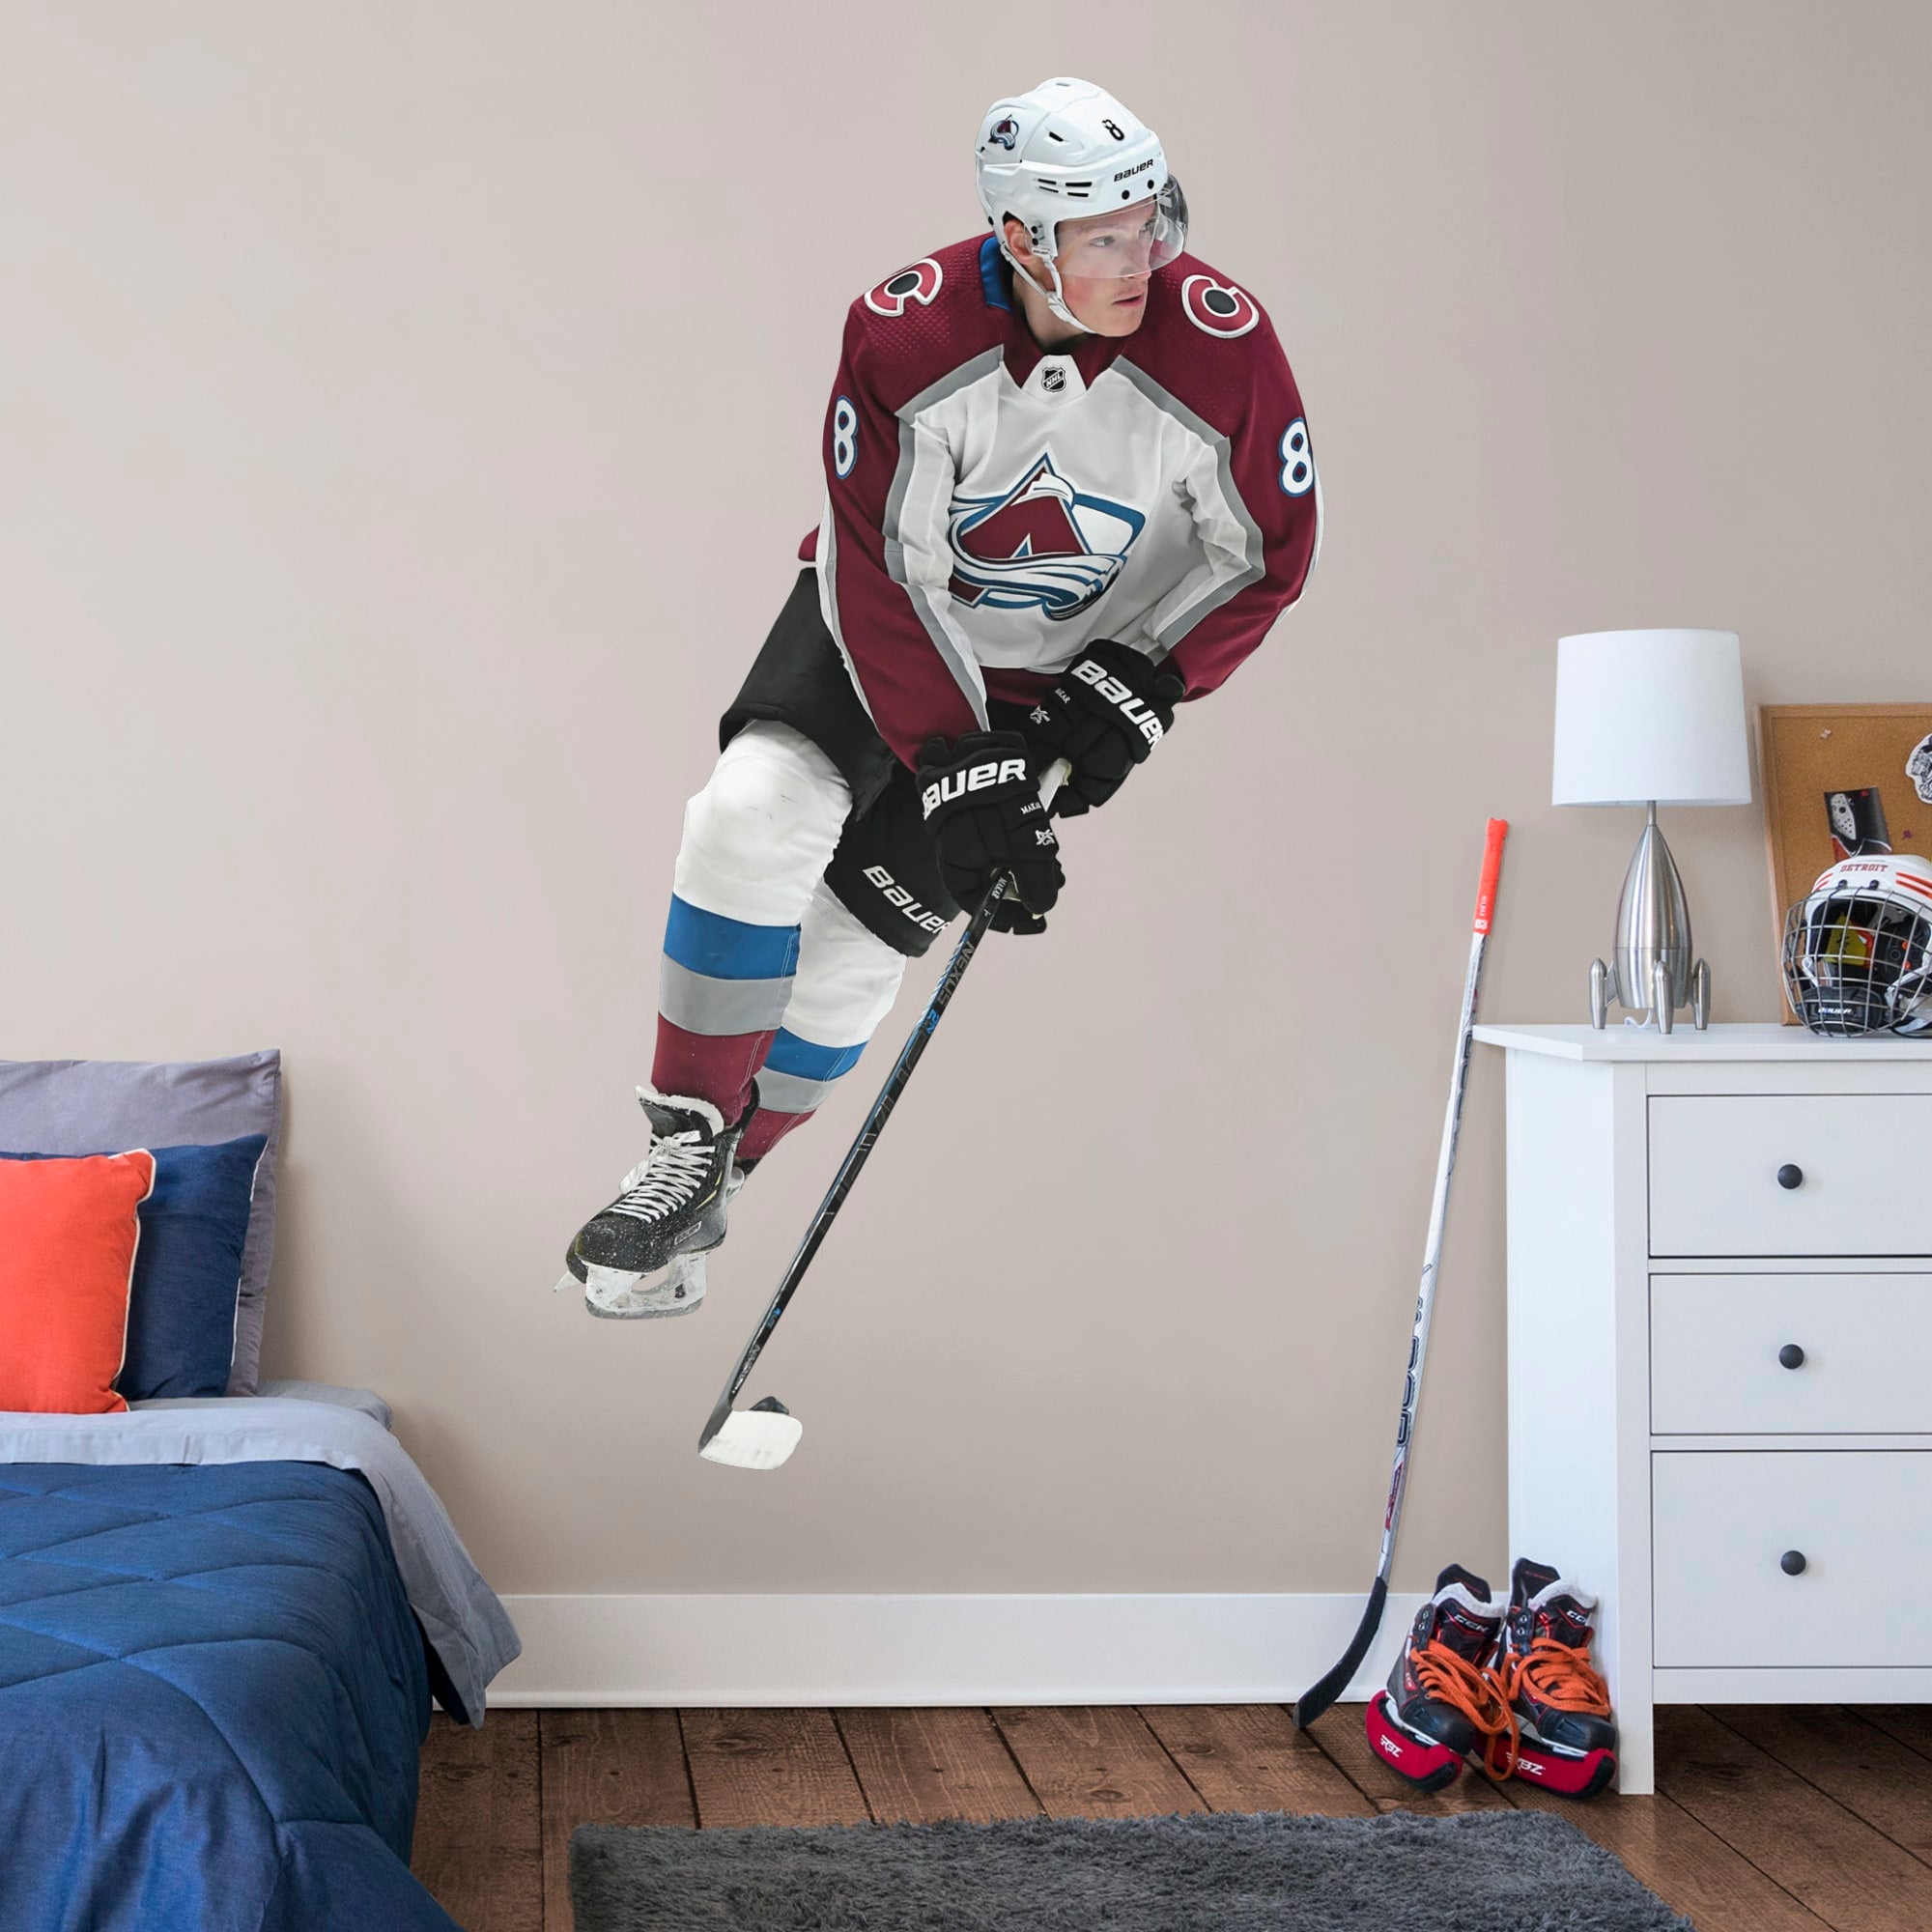 Cale Makar for Colorado Avalanche - Officially Licensed NHL Removable Wall Decal Life-Size Athlete + 2 Team Decals (43"W x 78"H)